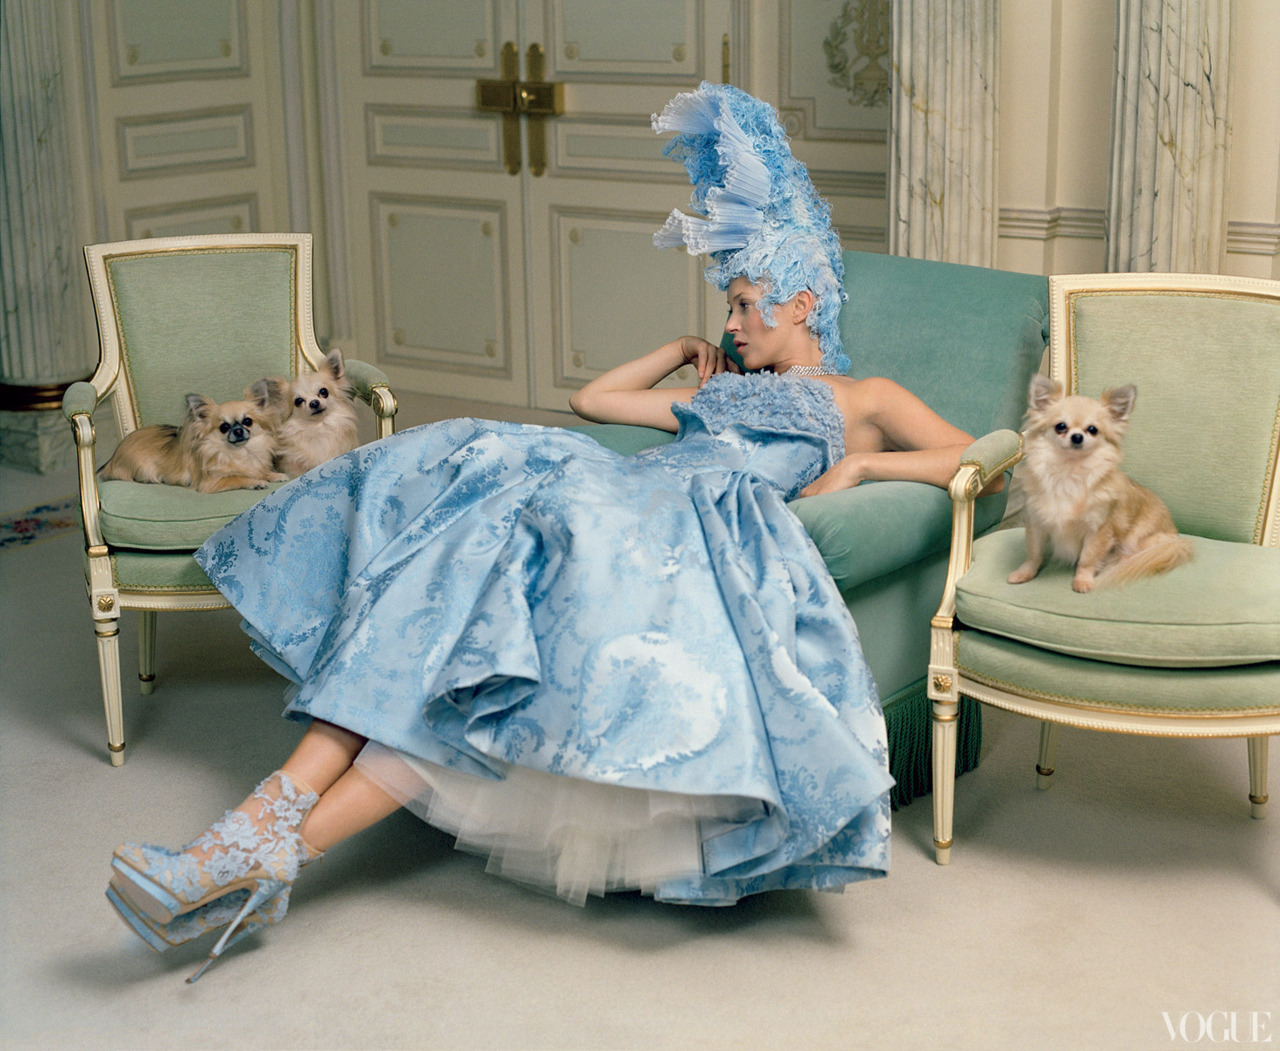 kate by Tim Walker for Vogue at the Ritz